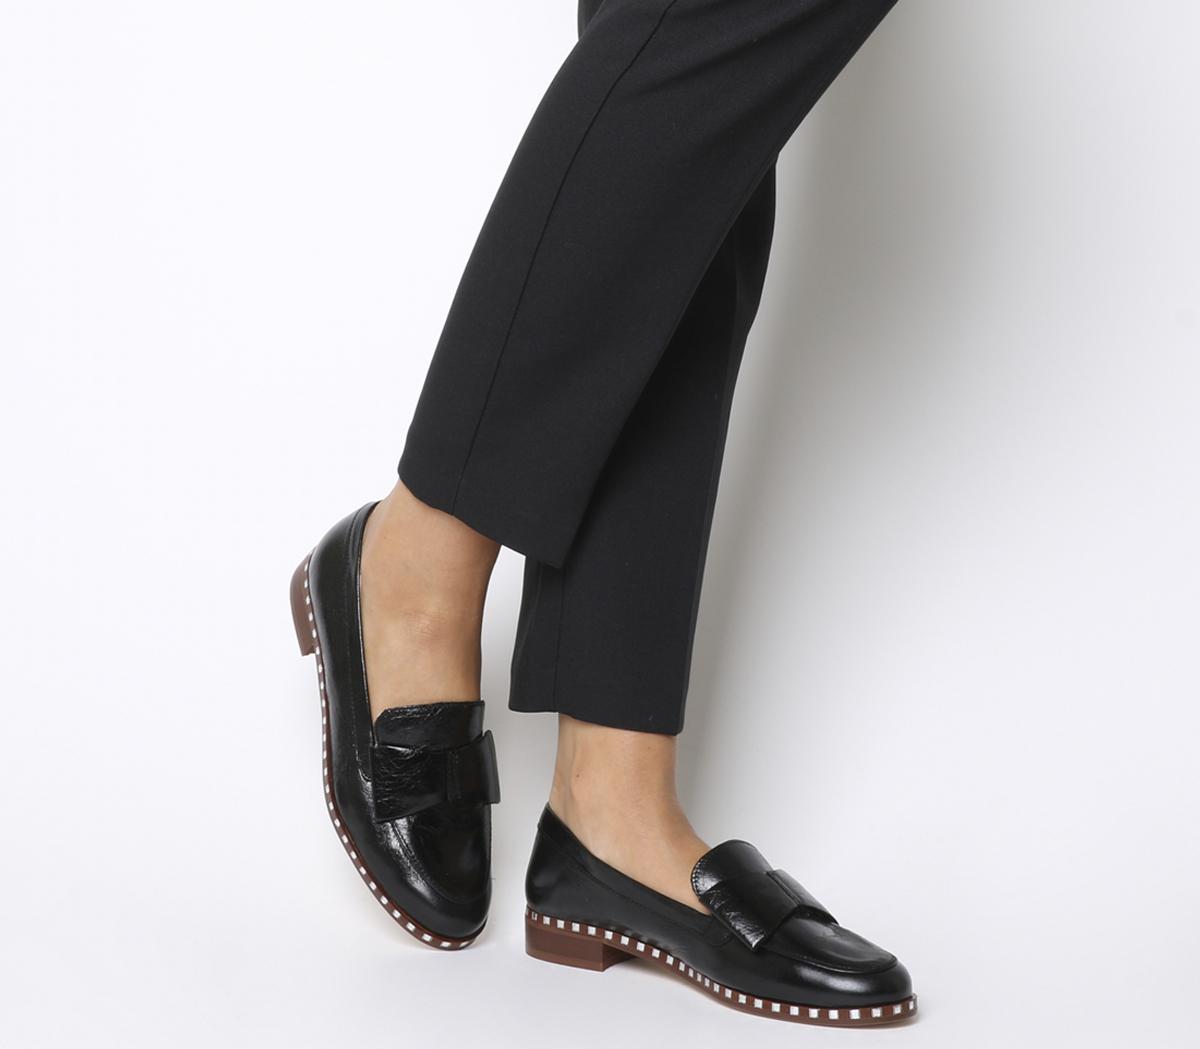 OFFICEPresent Bow LoafersBlack Leather Choc Sole With Studded Rand